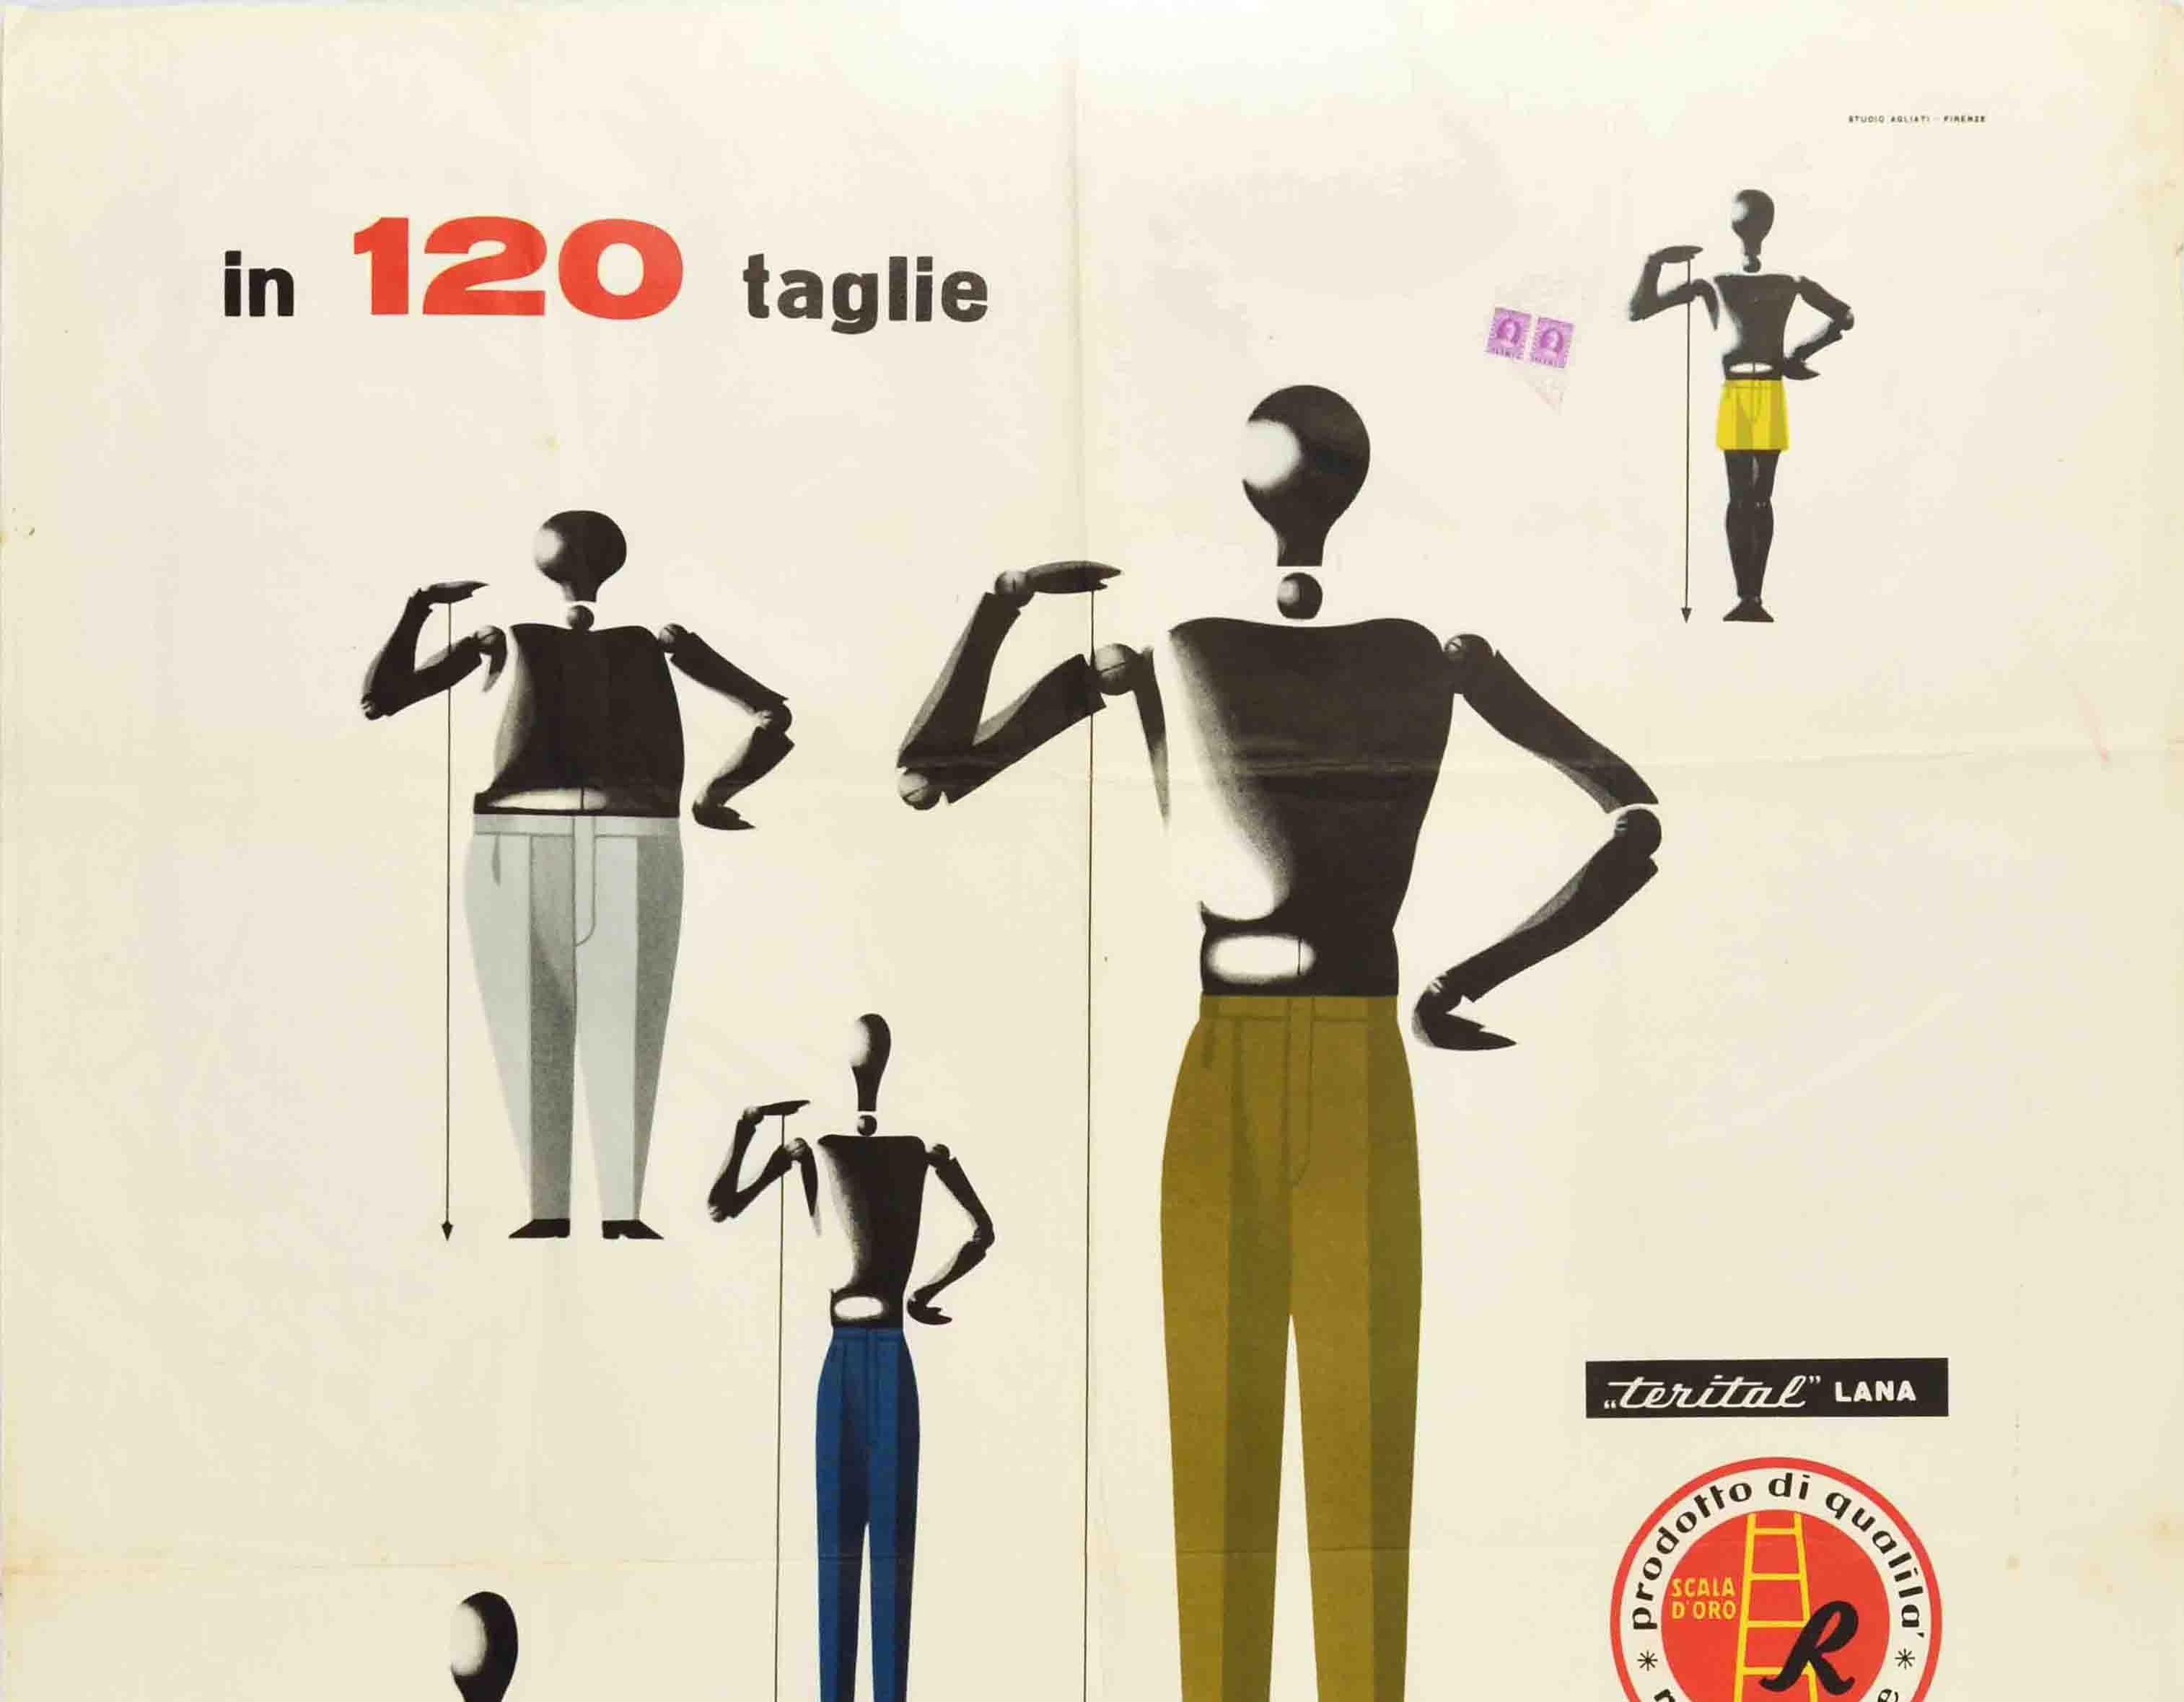 Original vintage fashion advertising poster: In 120 Taglie Talbor Il Pantalone Perfetto Per Tutti Nei Migliori Negozi / In 120 Sizes Talbor The Perfect Trousers For All In The Best Shops. Great design featuring five different sized mannequins in